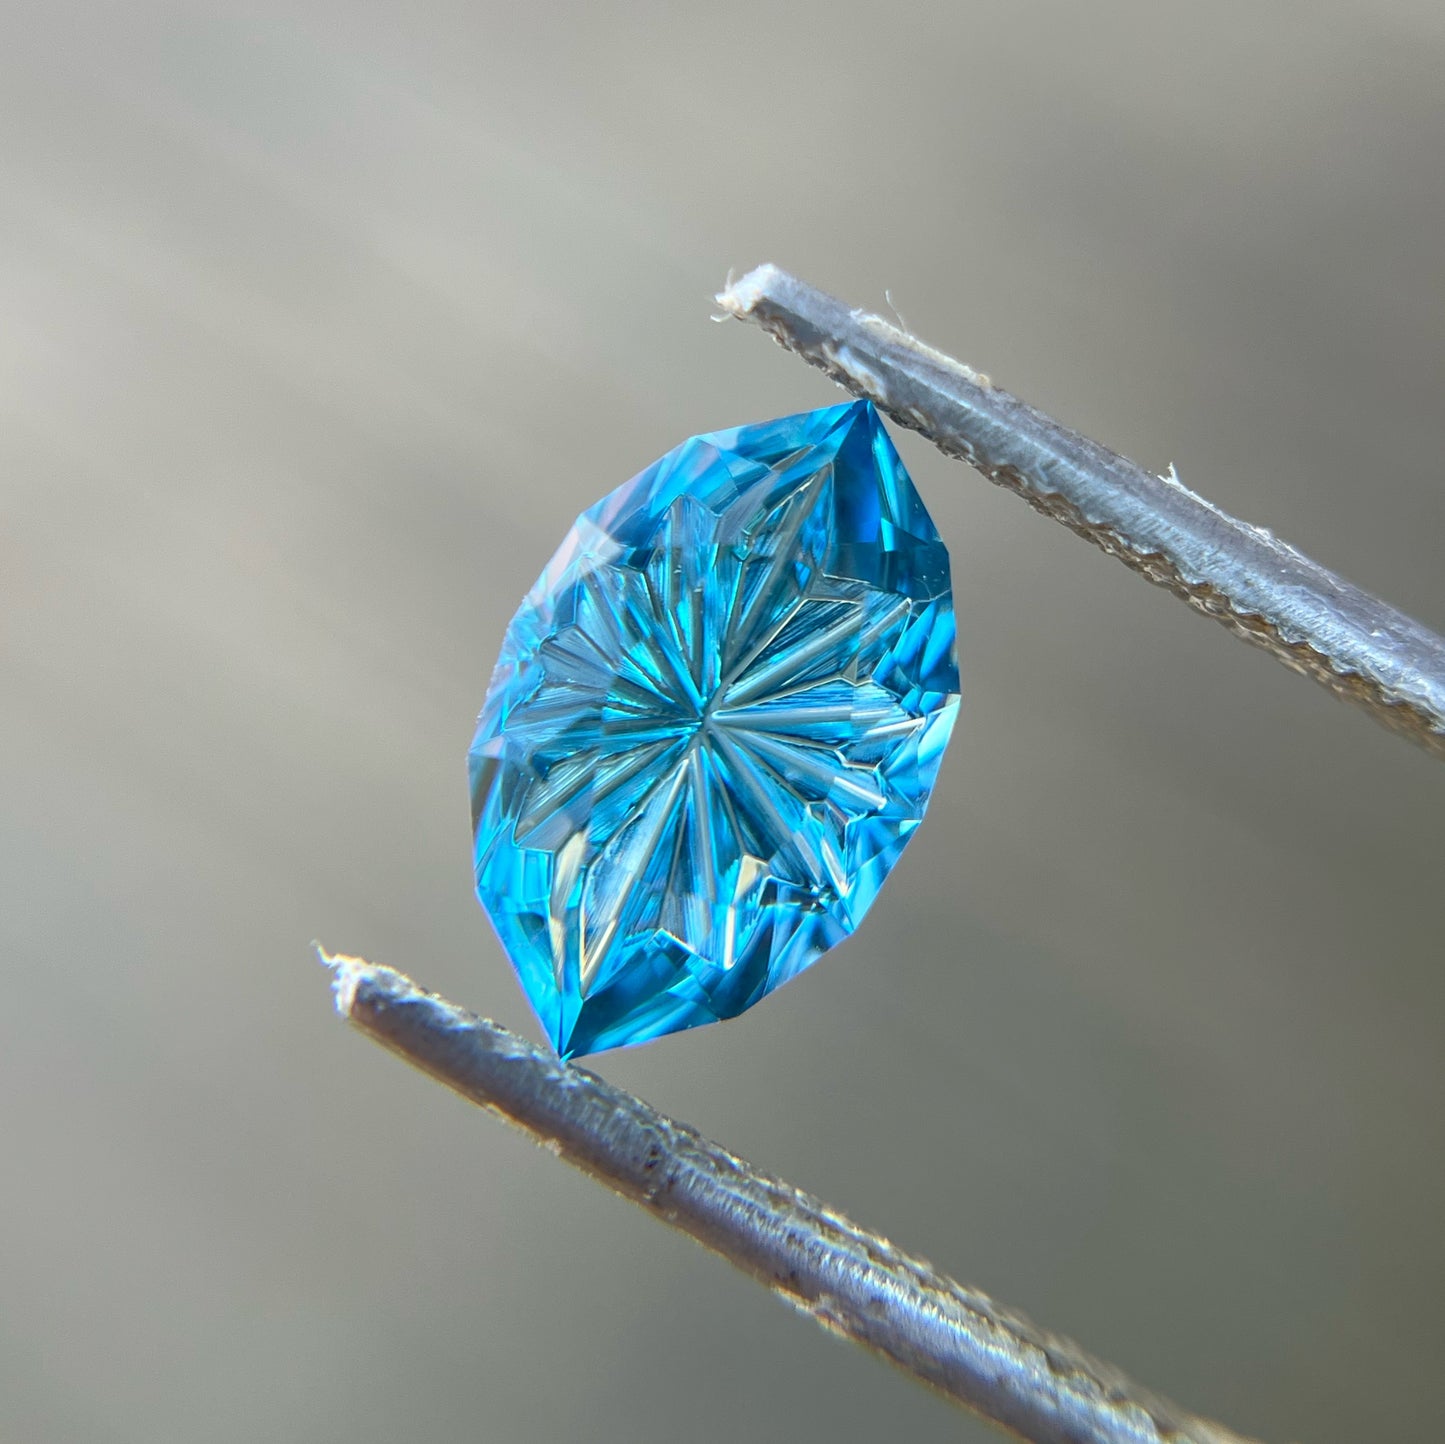 3.8ct Precision Cut Topaz with Fantasy Engraving Gemstone from Brazil